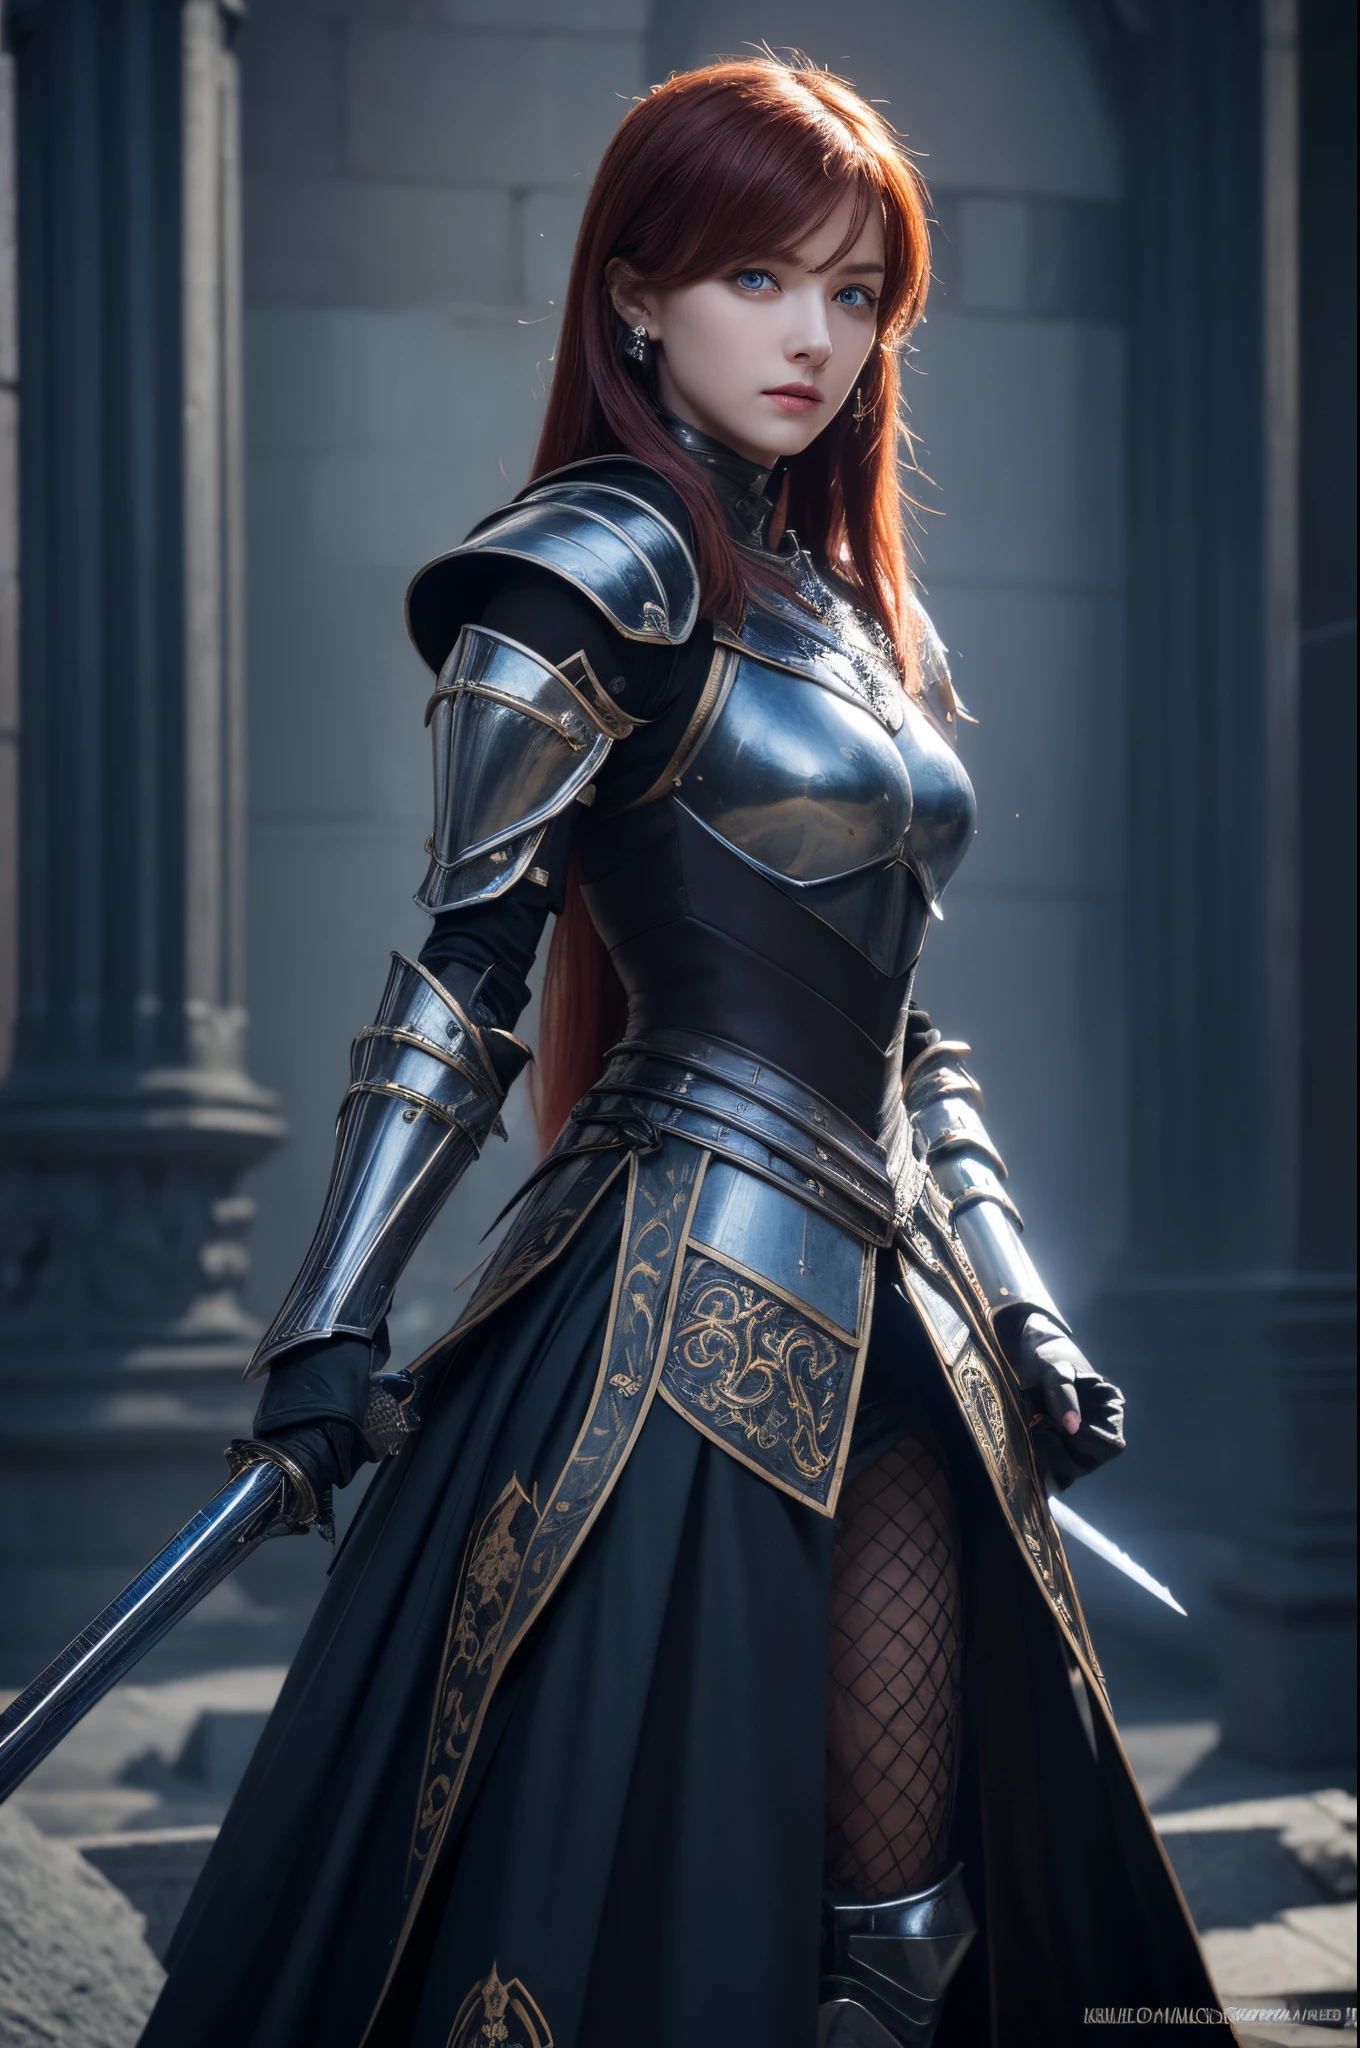 ((Best quality)), ((masterpiece)), (highly detailed:1.3), 3D, elegant woman with long straight hair in knight armor plate, large shoulder plate with kanote, medieval theme, bioluminescence, Beautiful face, brave, 2 tone color, cinematic, 3D render, Octance Rendar, red hair, earing, dramatically posing as a knight, standing on top of the building, city escape, hairs go along with winds, sunny day, medieval, no helmet, vines grow in her armor, ancient armor, black and grey color for armor, shot underskirt, Sword on back, glowing eyes, blue eyes, beautiful leg, sexy, showing skin cleavage,